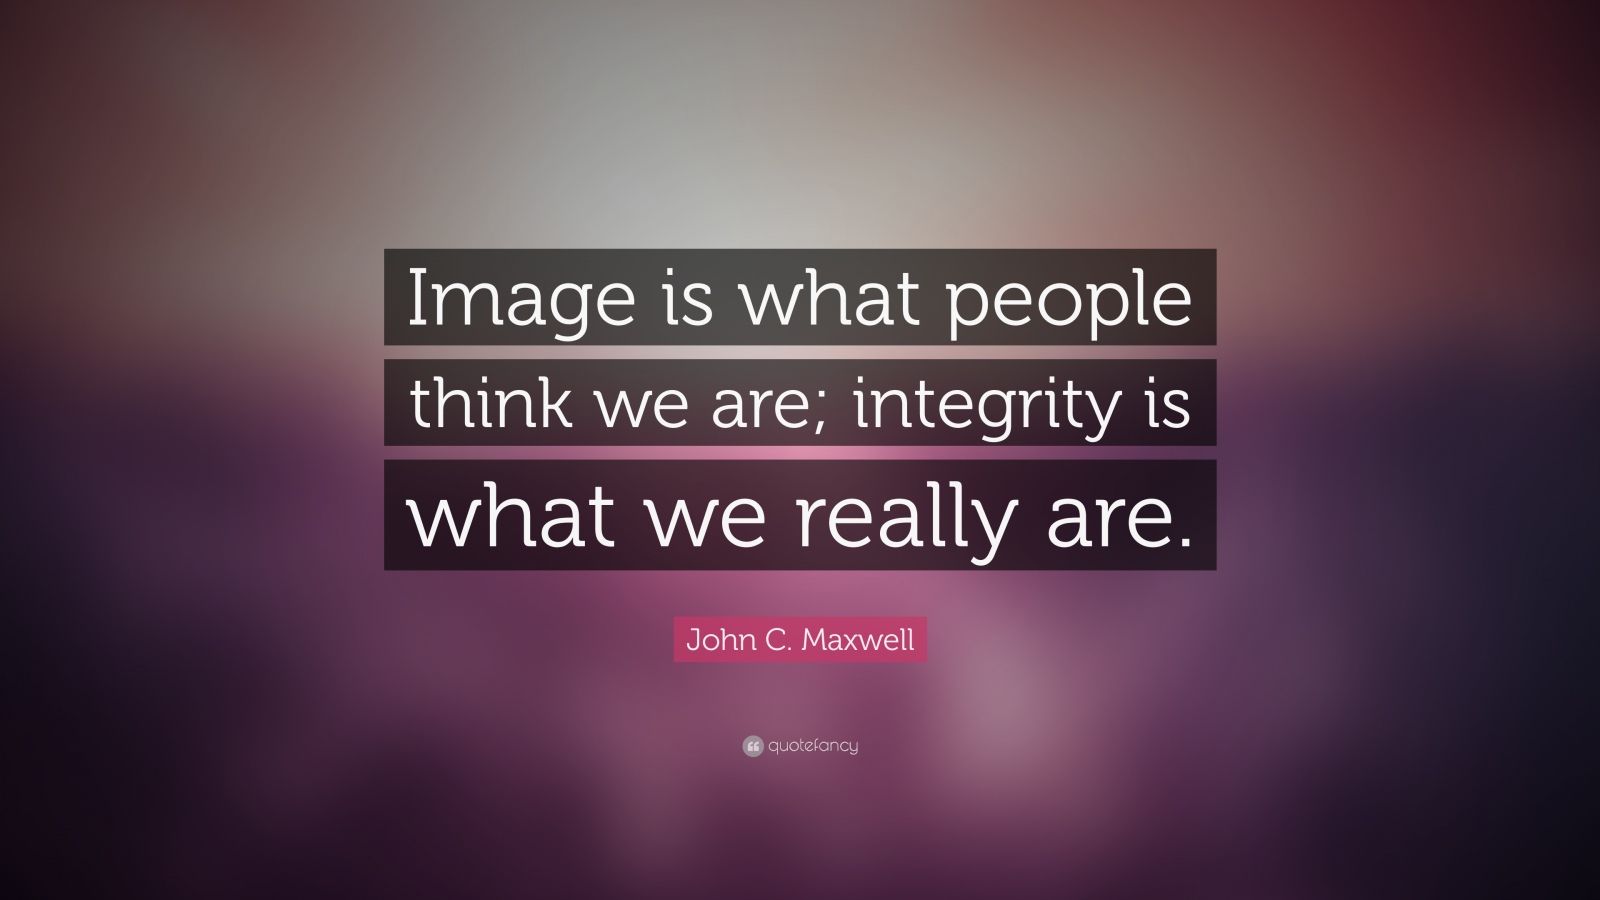 quotes about integrity